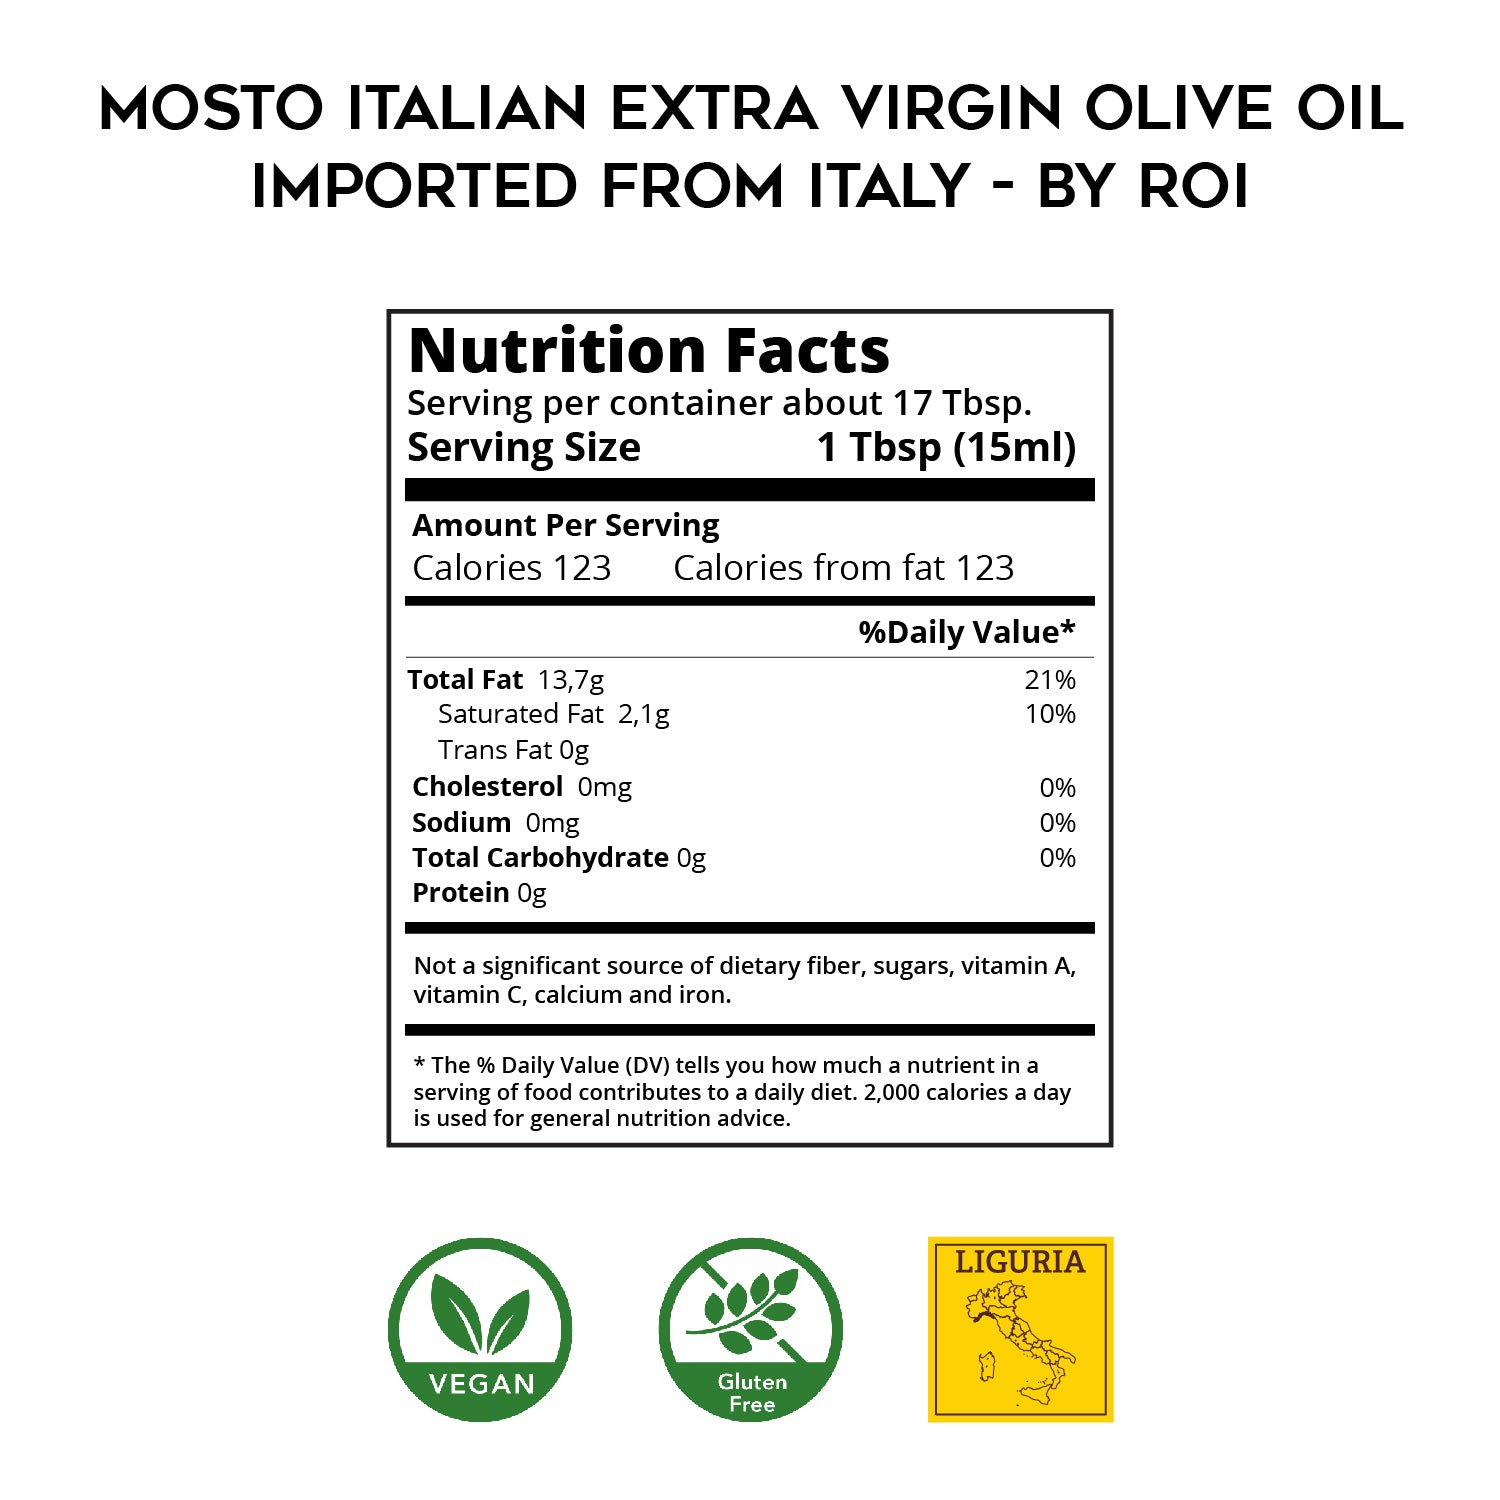 Mosto Italian Extra Virgin Olive Oil - Imported From Italy - by ROI